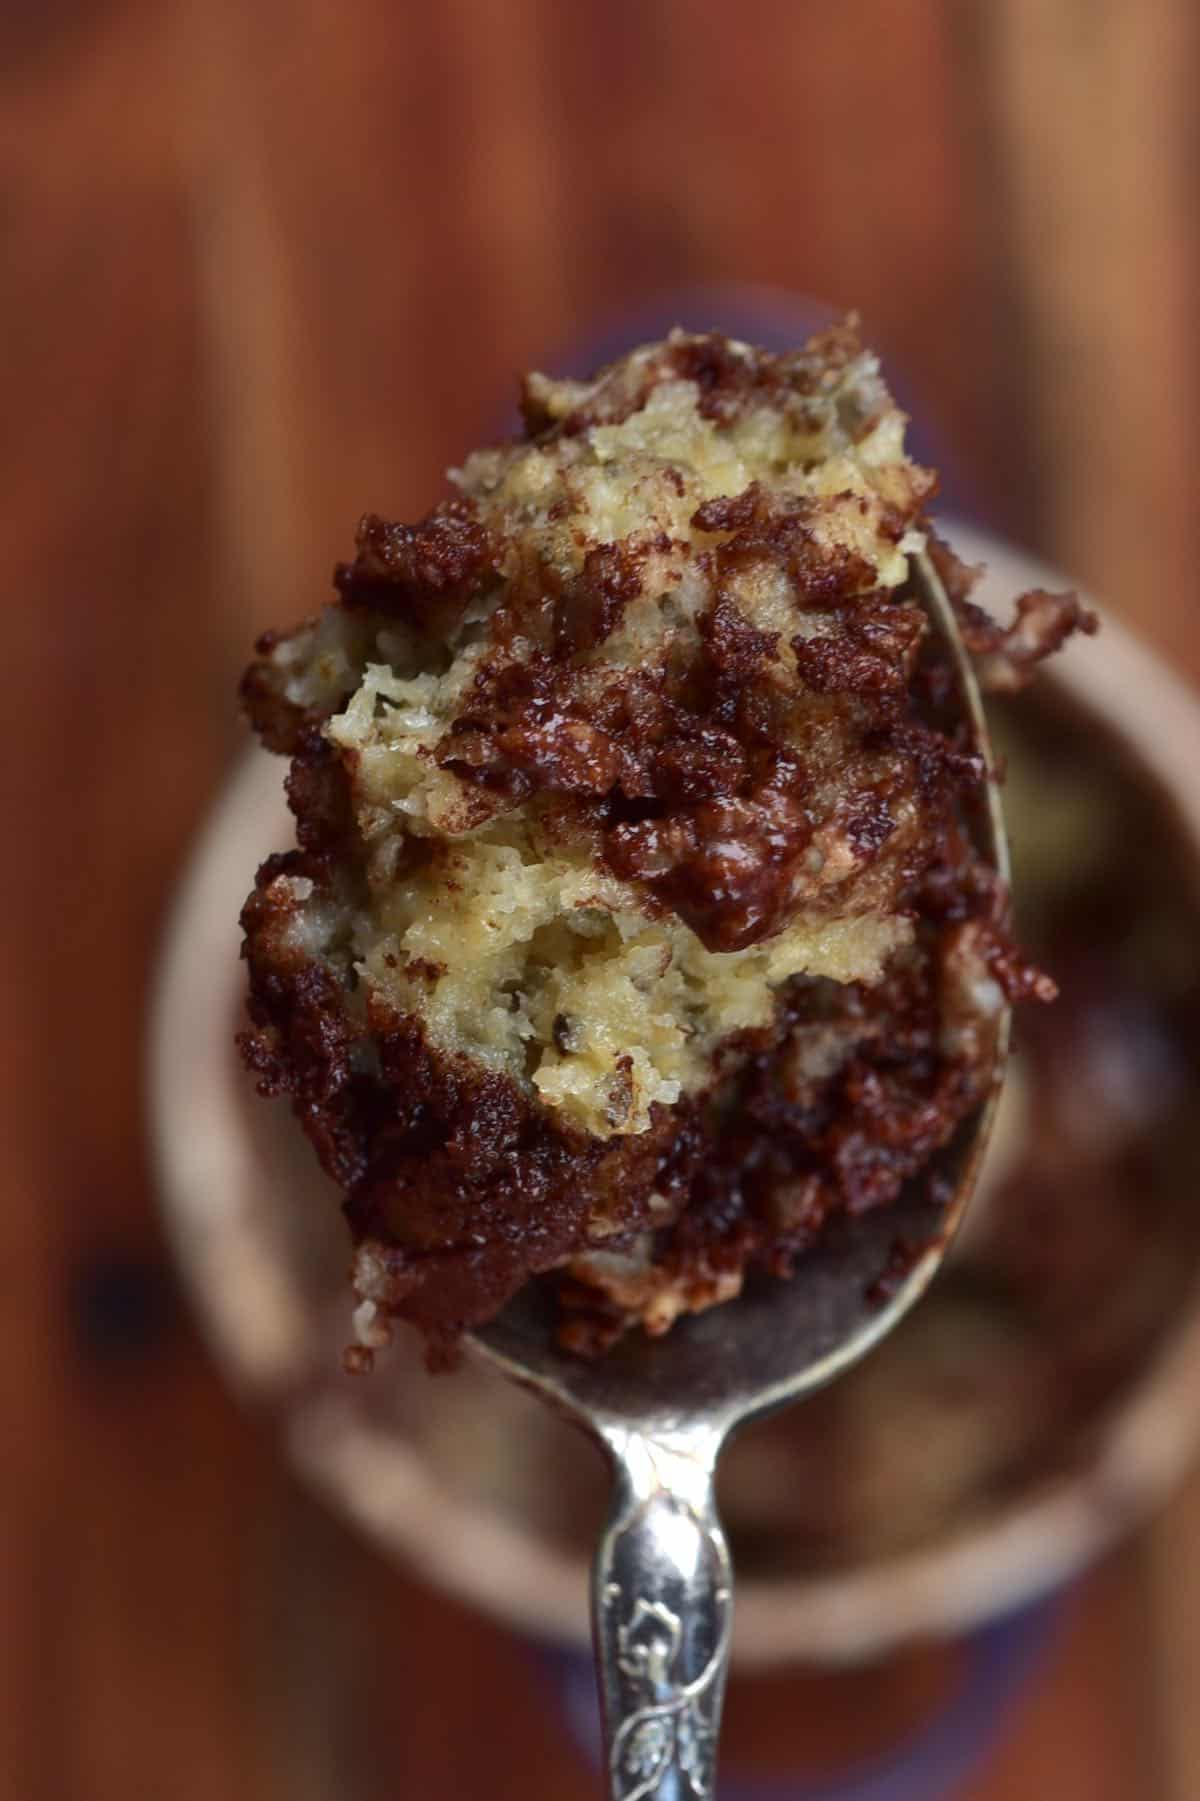 A spoonful of baked vanilla chocolate oats